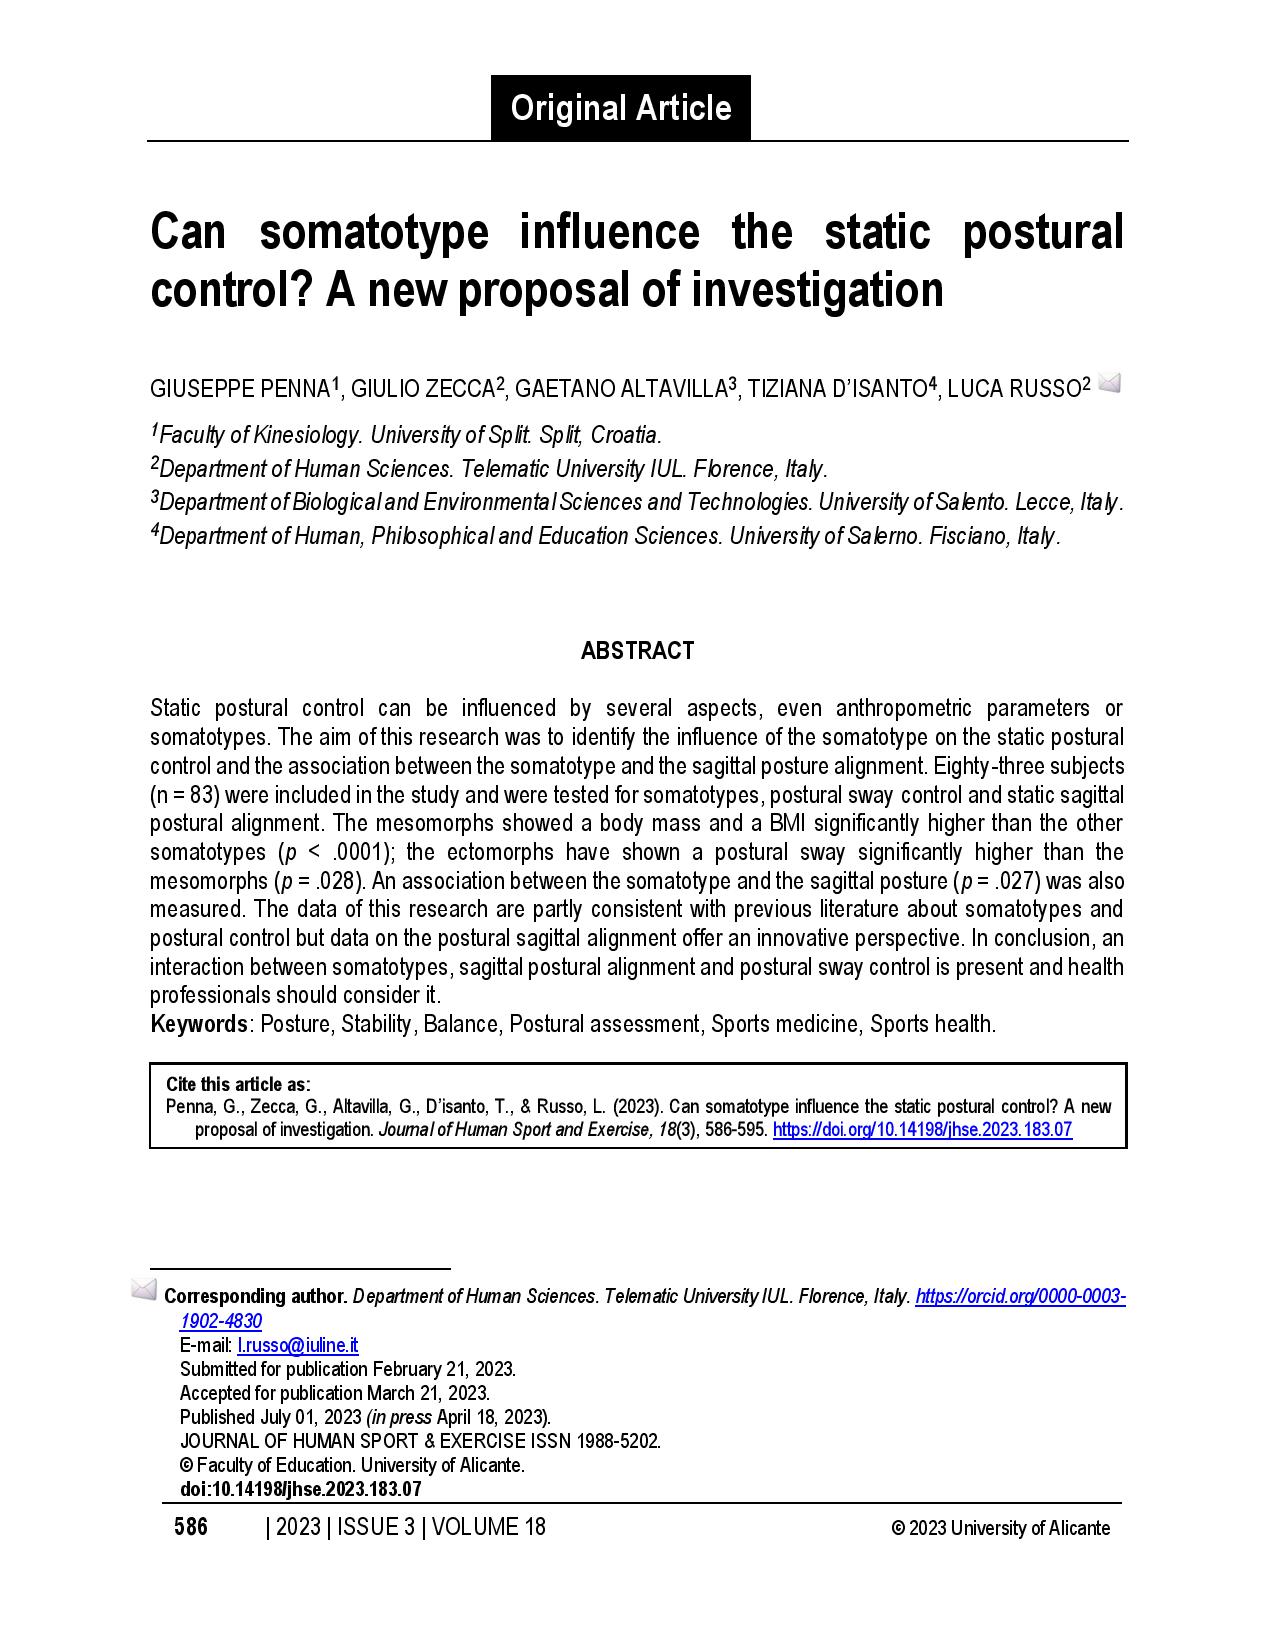 Can somatotype influence the static postural control? A new proposal of investigation